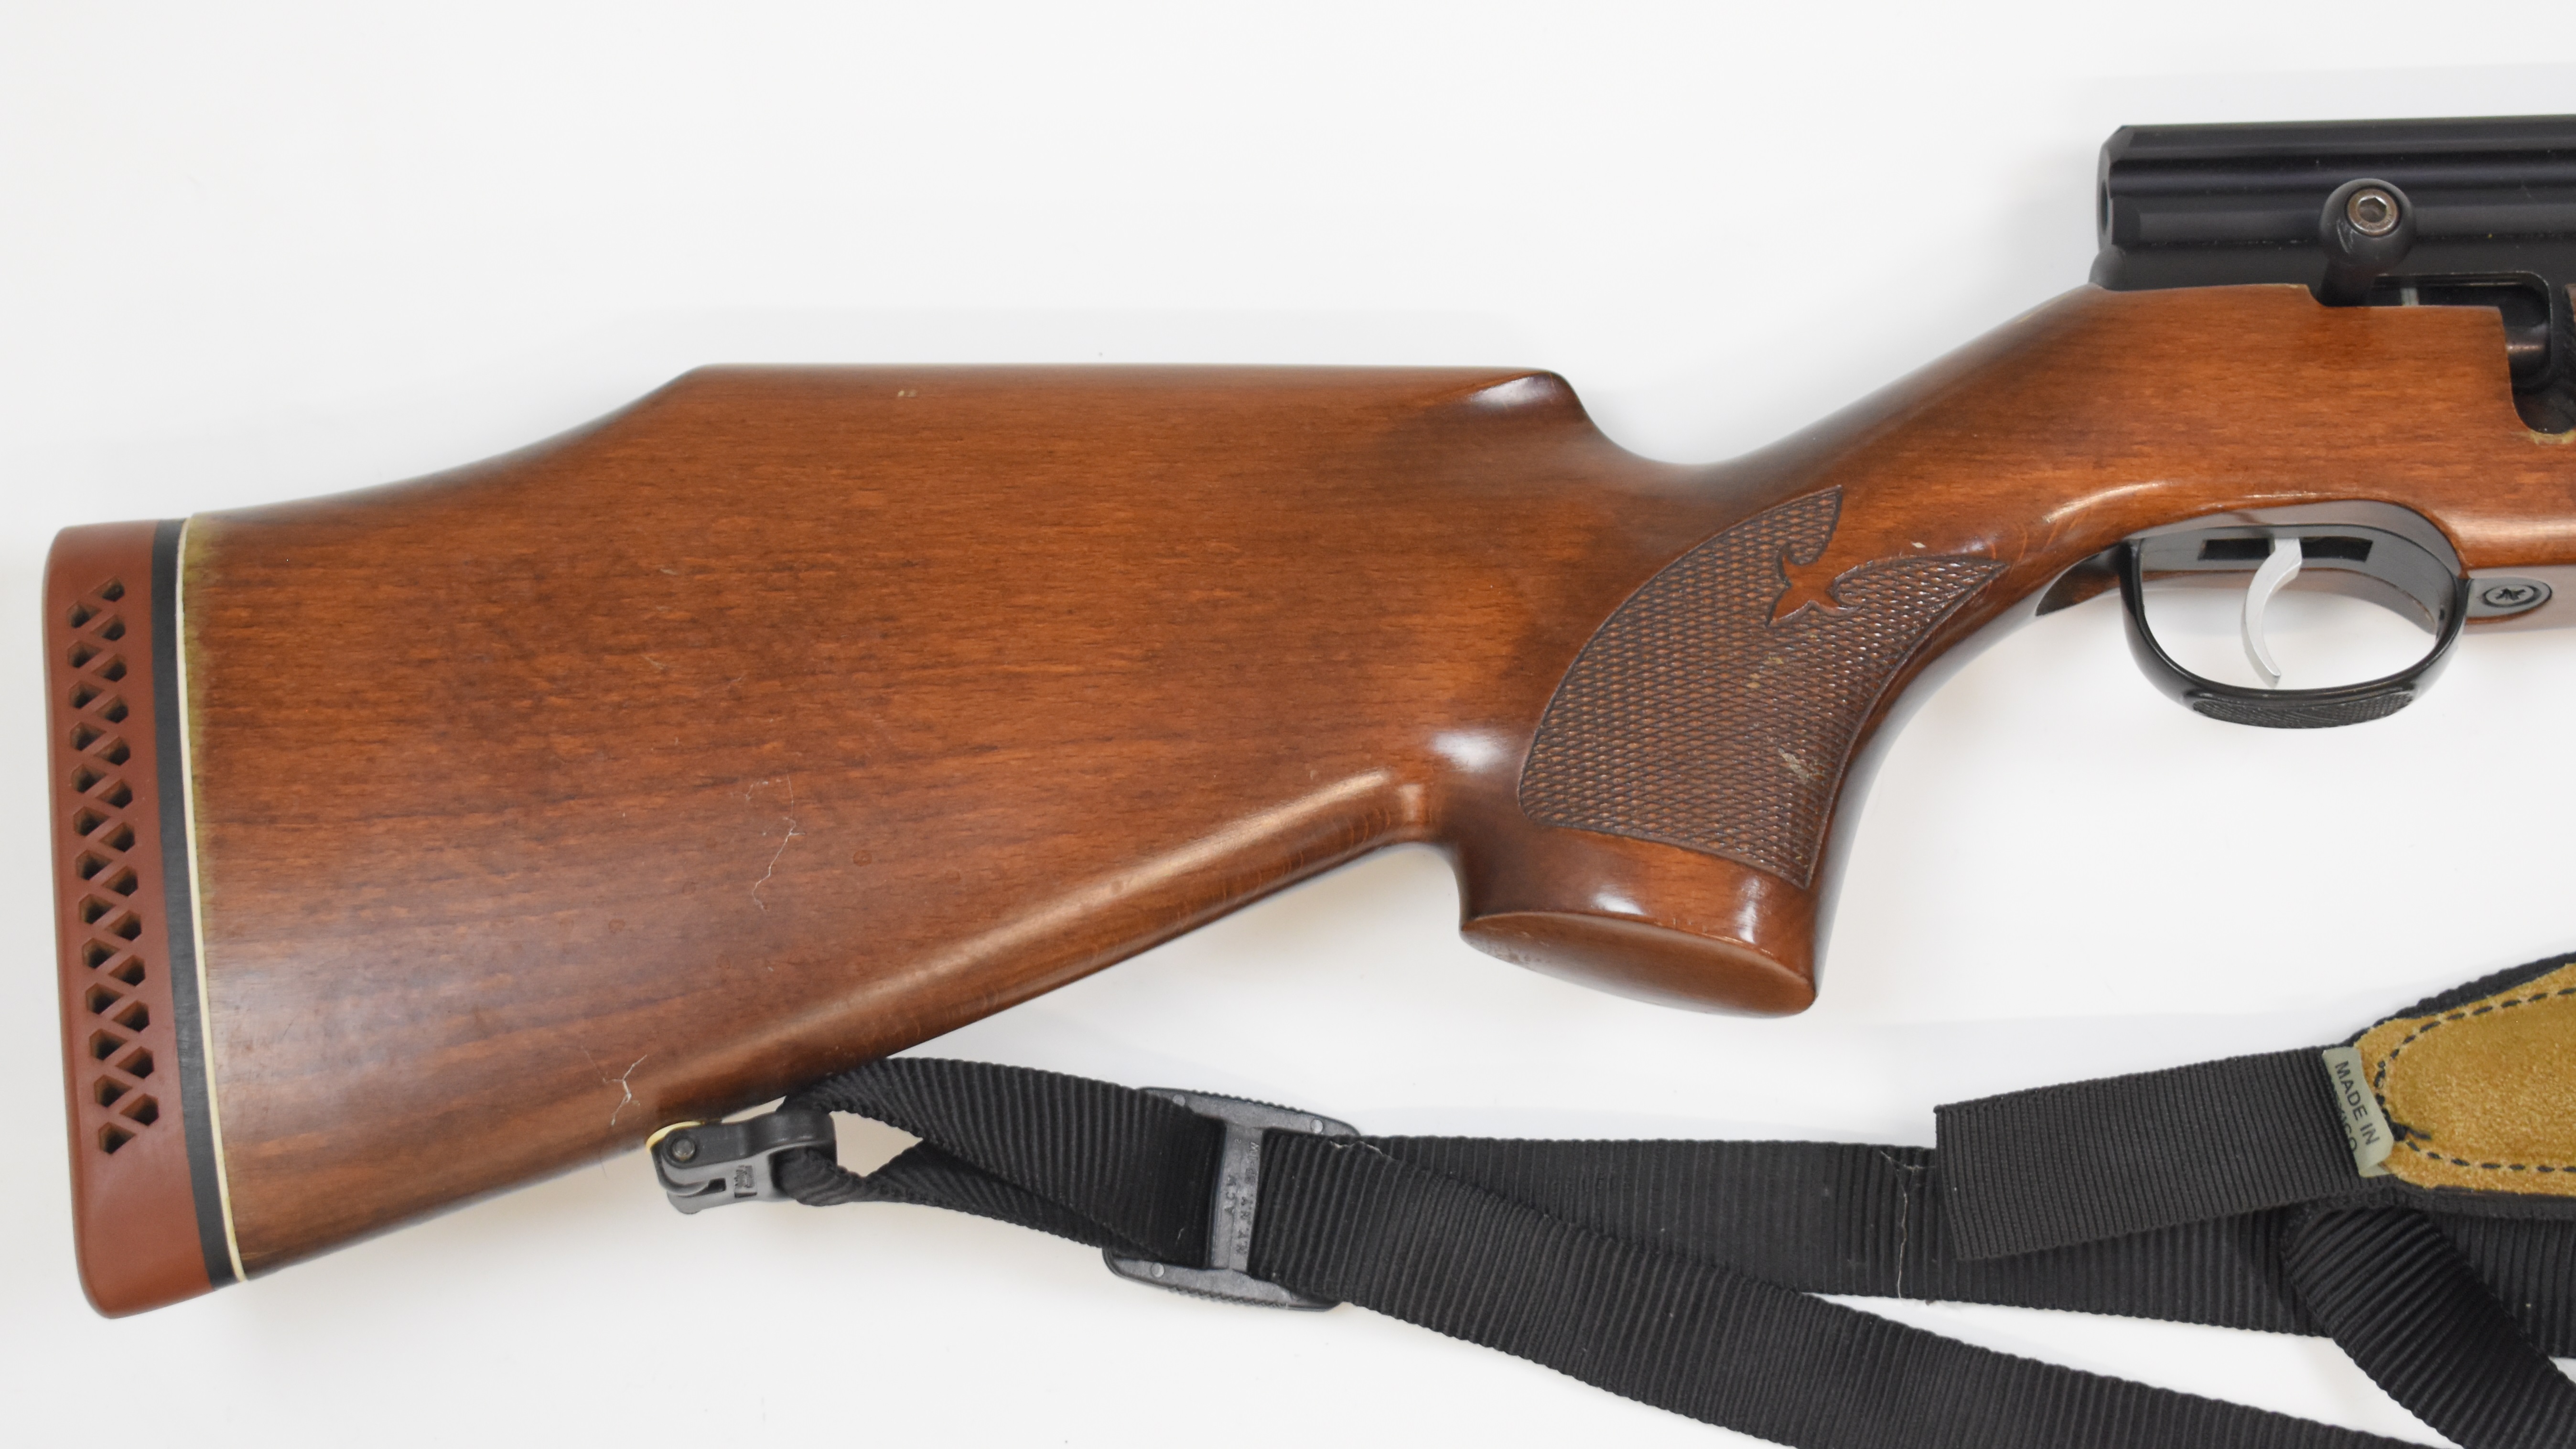 Webley Axsor .22 PCP air rifle with chequered semi-pistol grip and forend, raised cheek piece, - Image 3 of 10